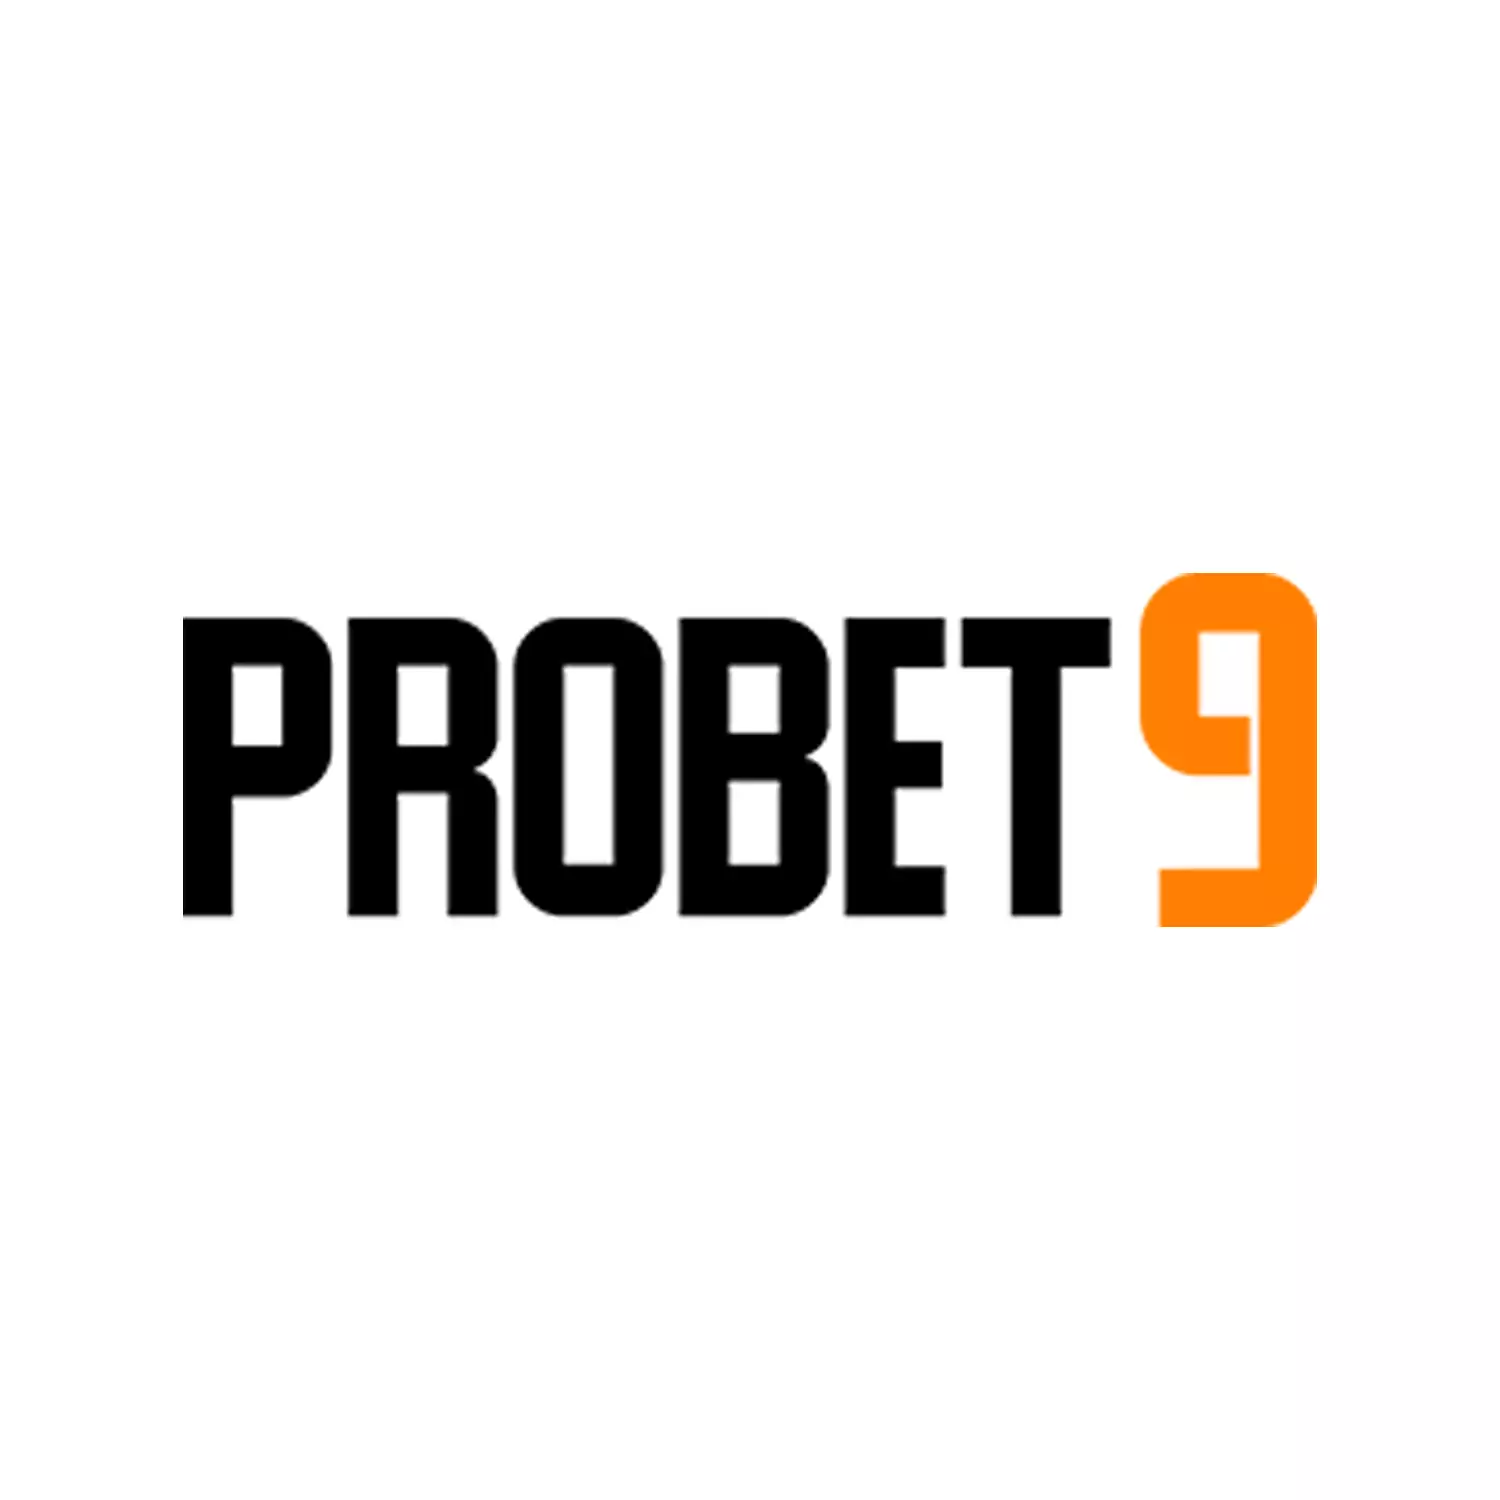 We do not recommend Probet9 for cricket betting.